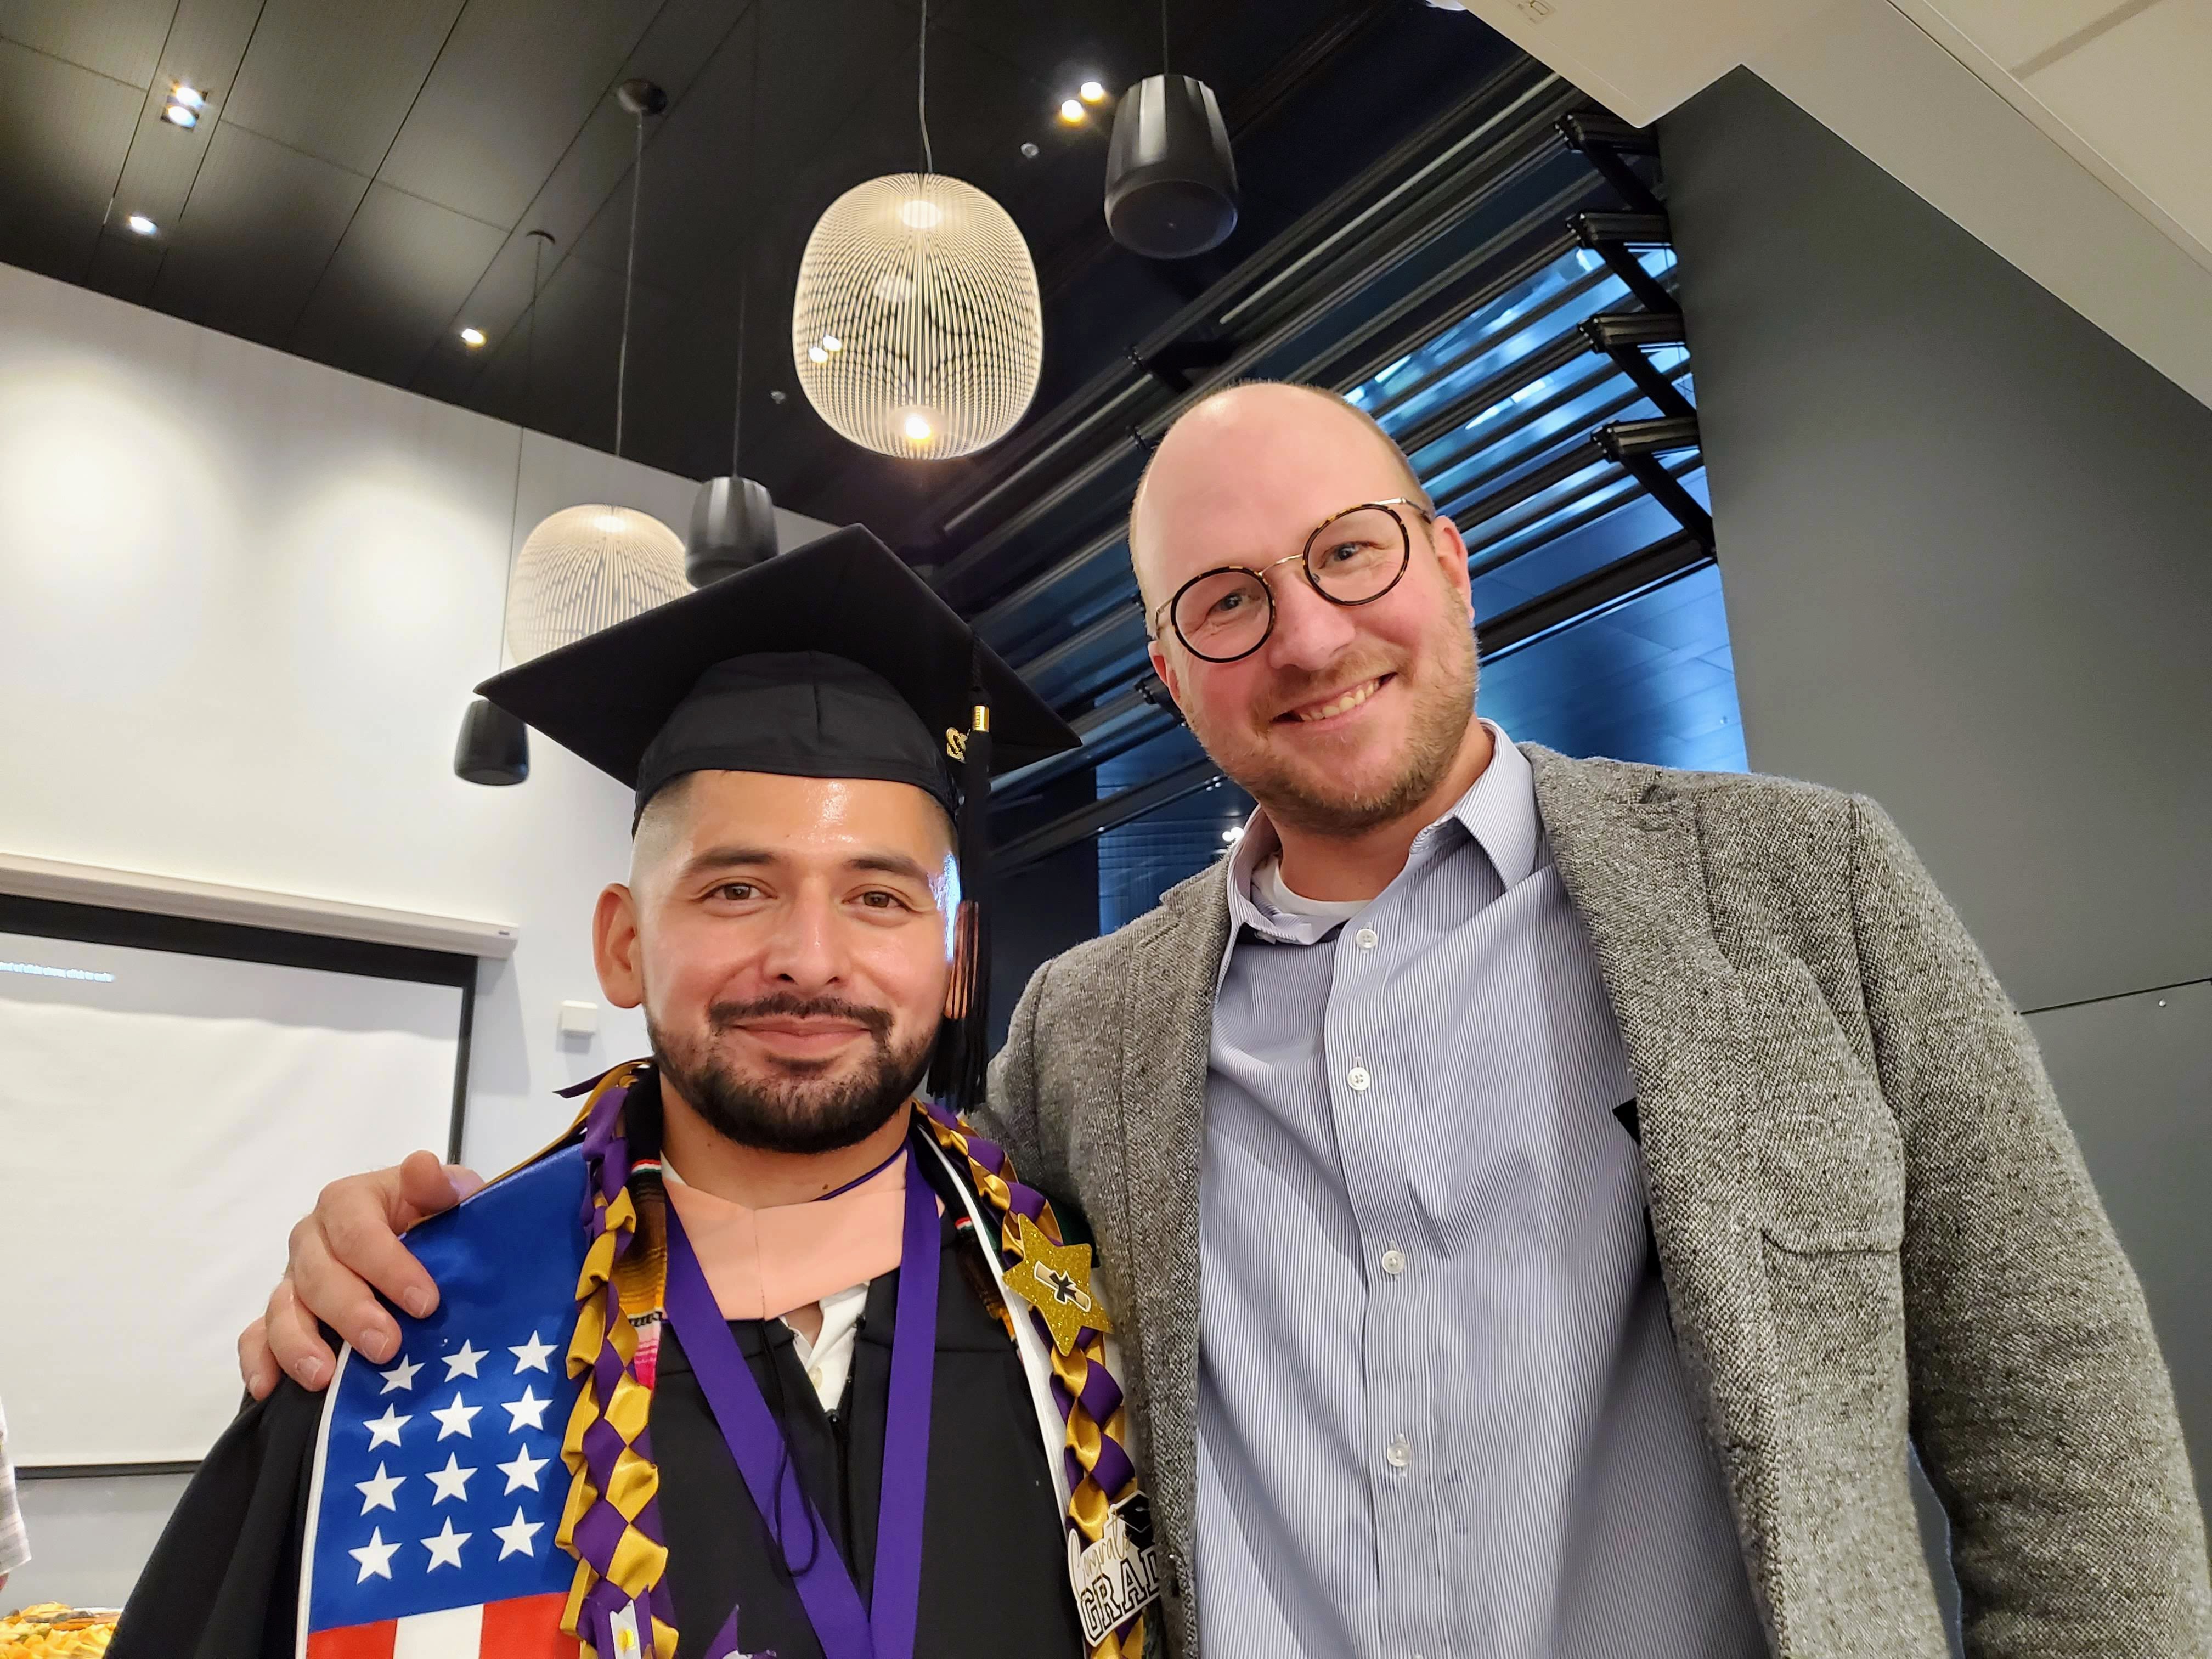 A graduate student poses next to his mentor at the DEOHS graduation reception.